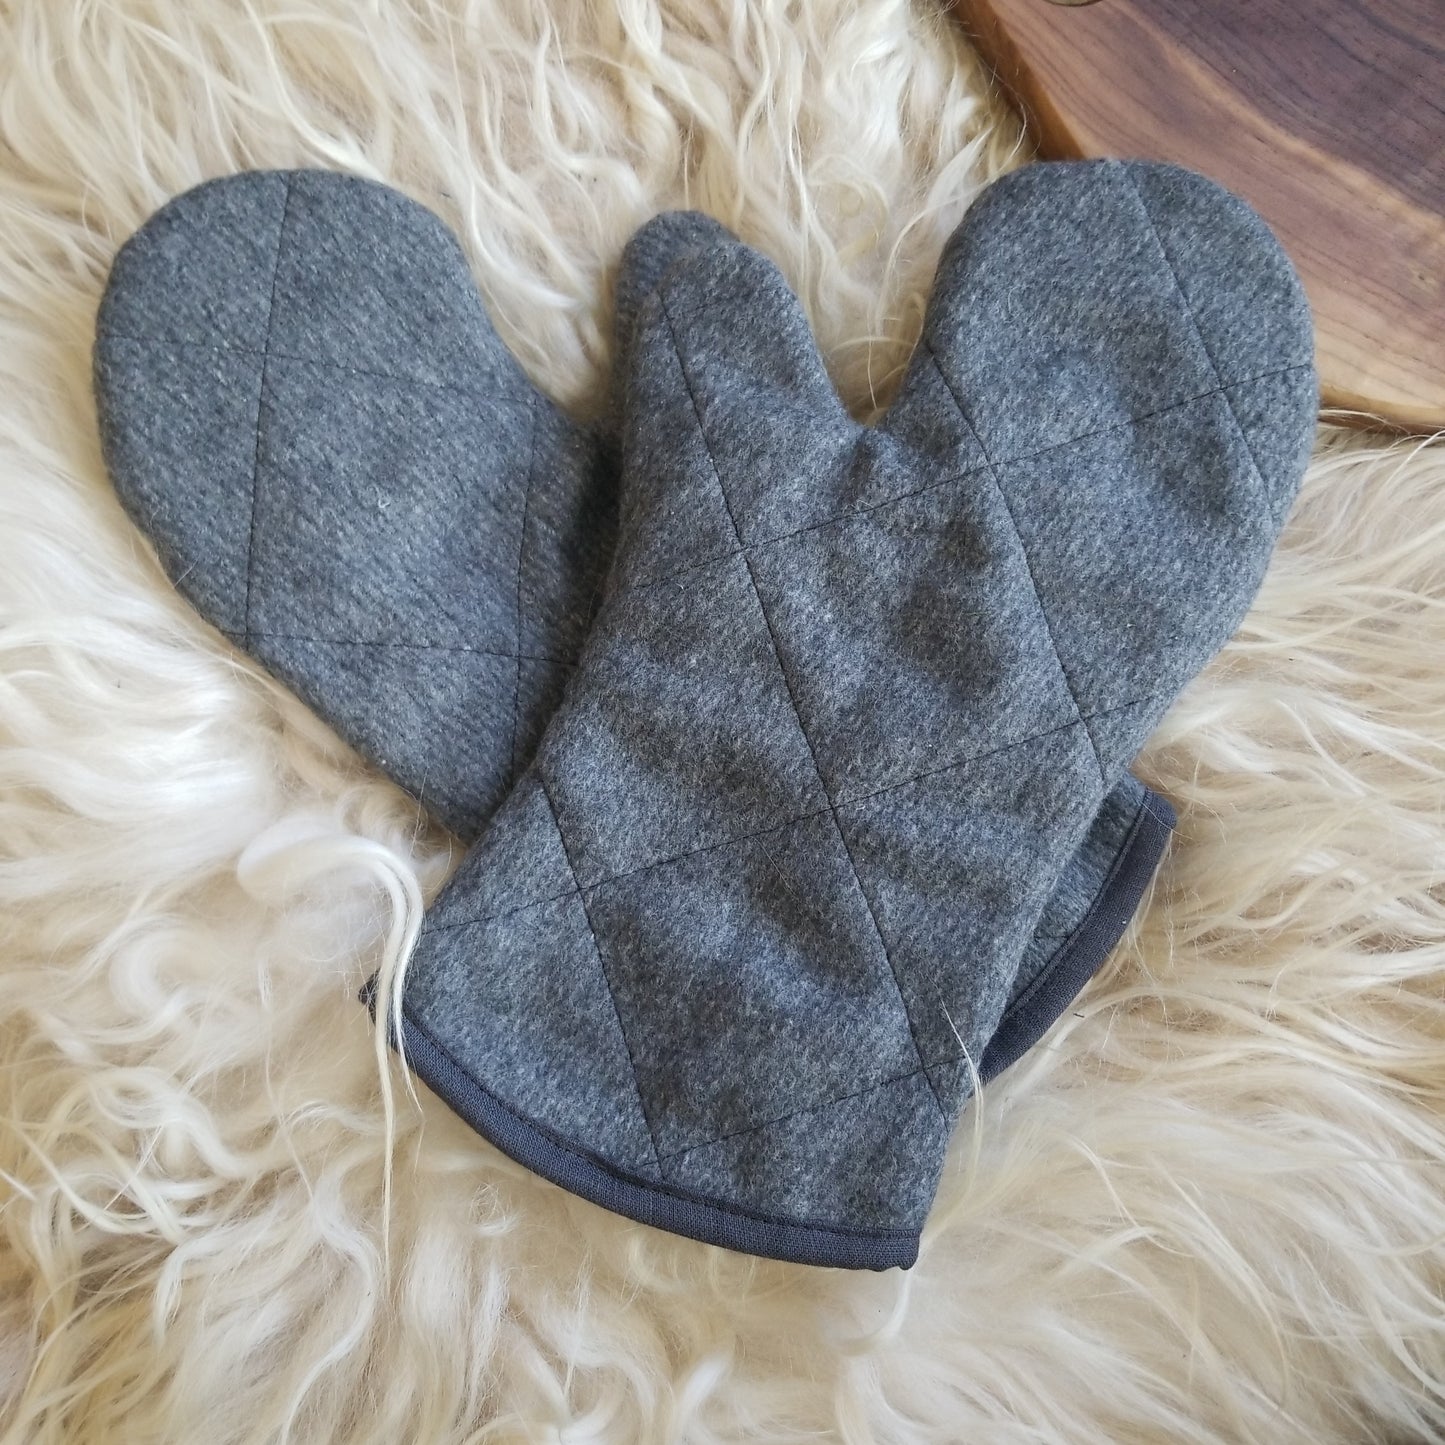 Fossil Springs Oven Mitts